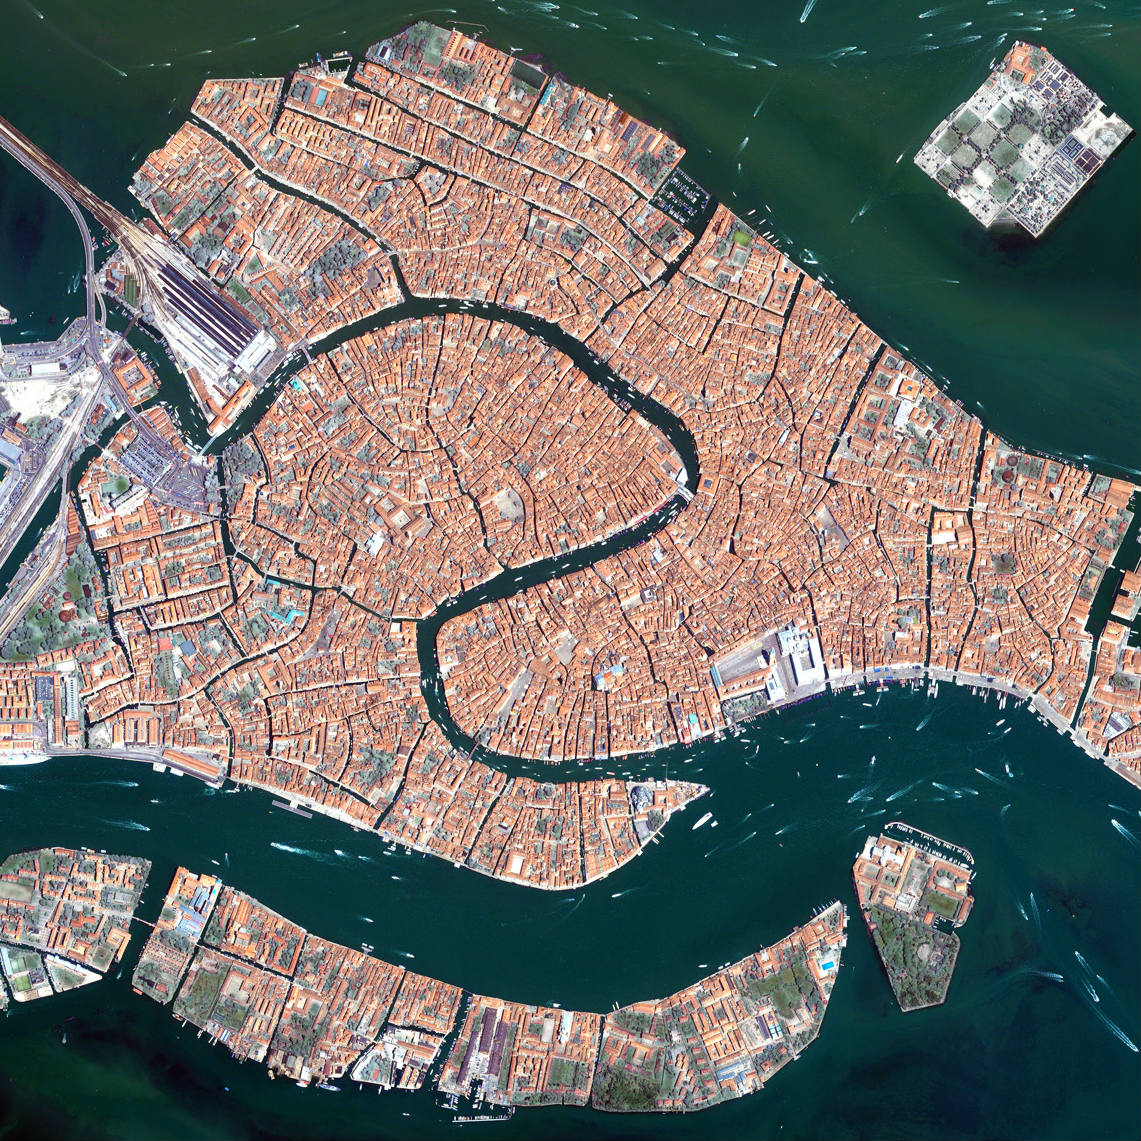 http://www.esa.int/spaceinimages/Images/2011/09/Floating_city